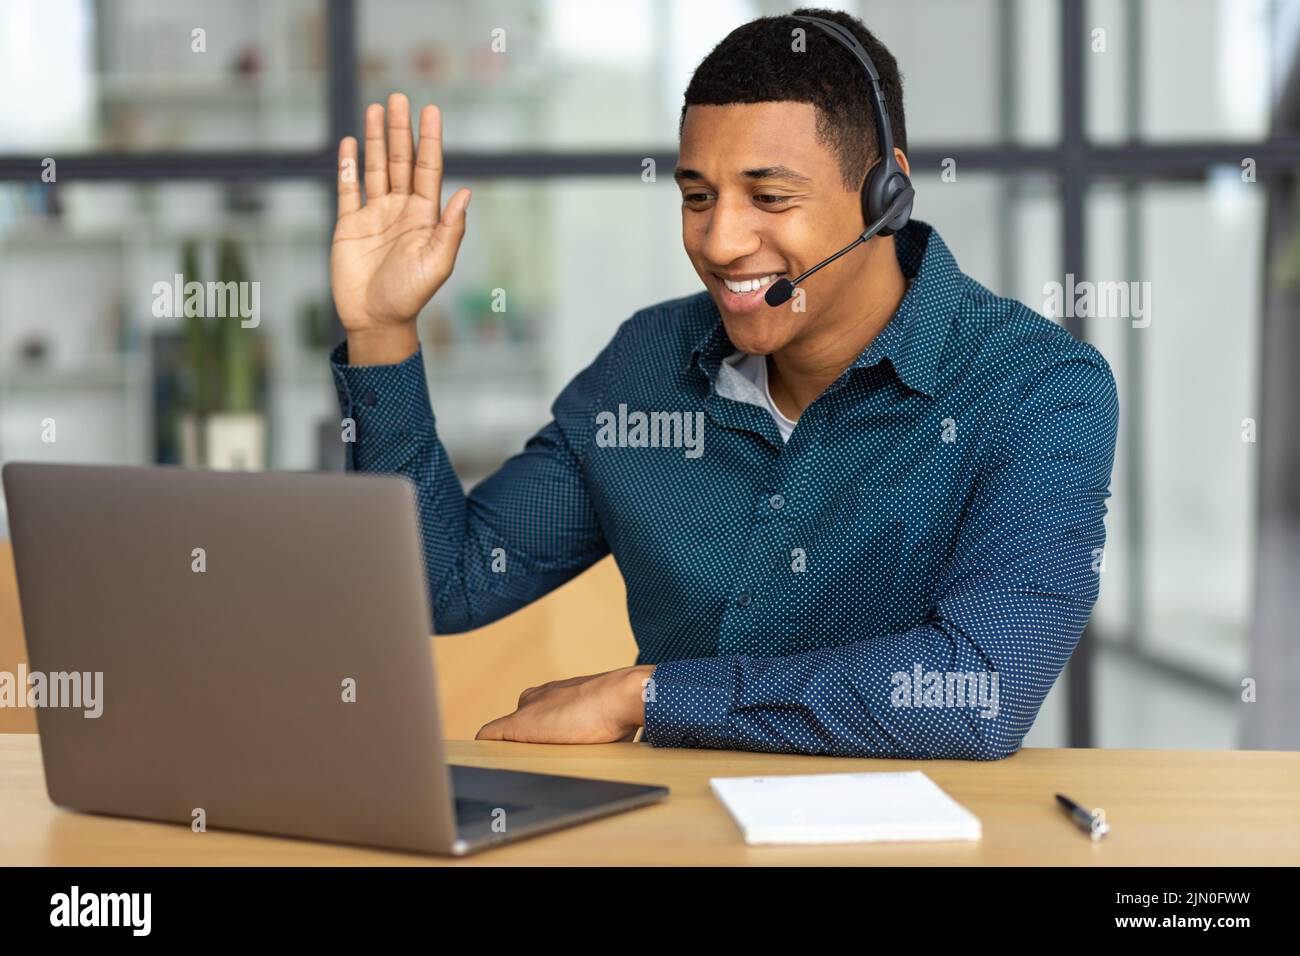 Successful man in headset office employee or call center worker talking consulting client using video call smile Stock Photo